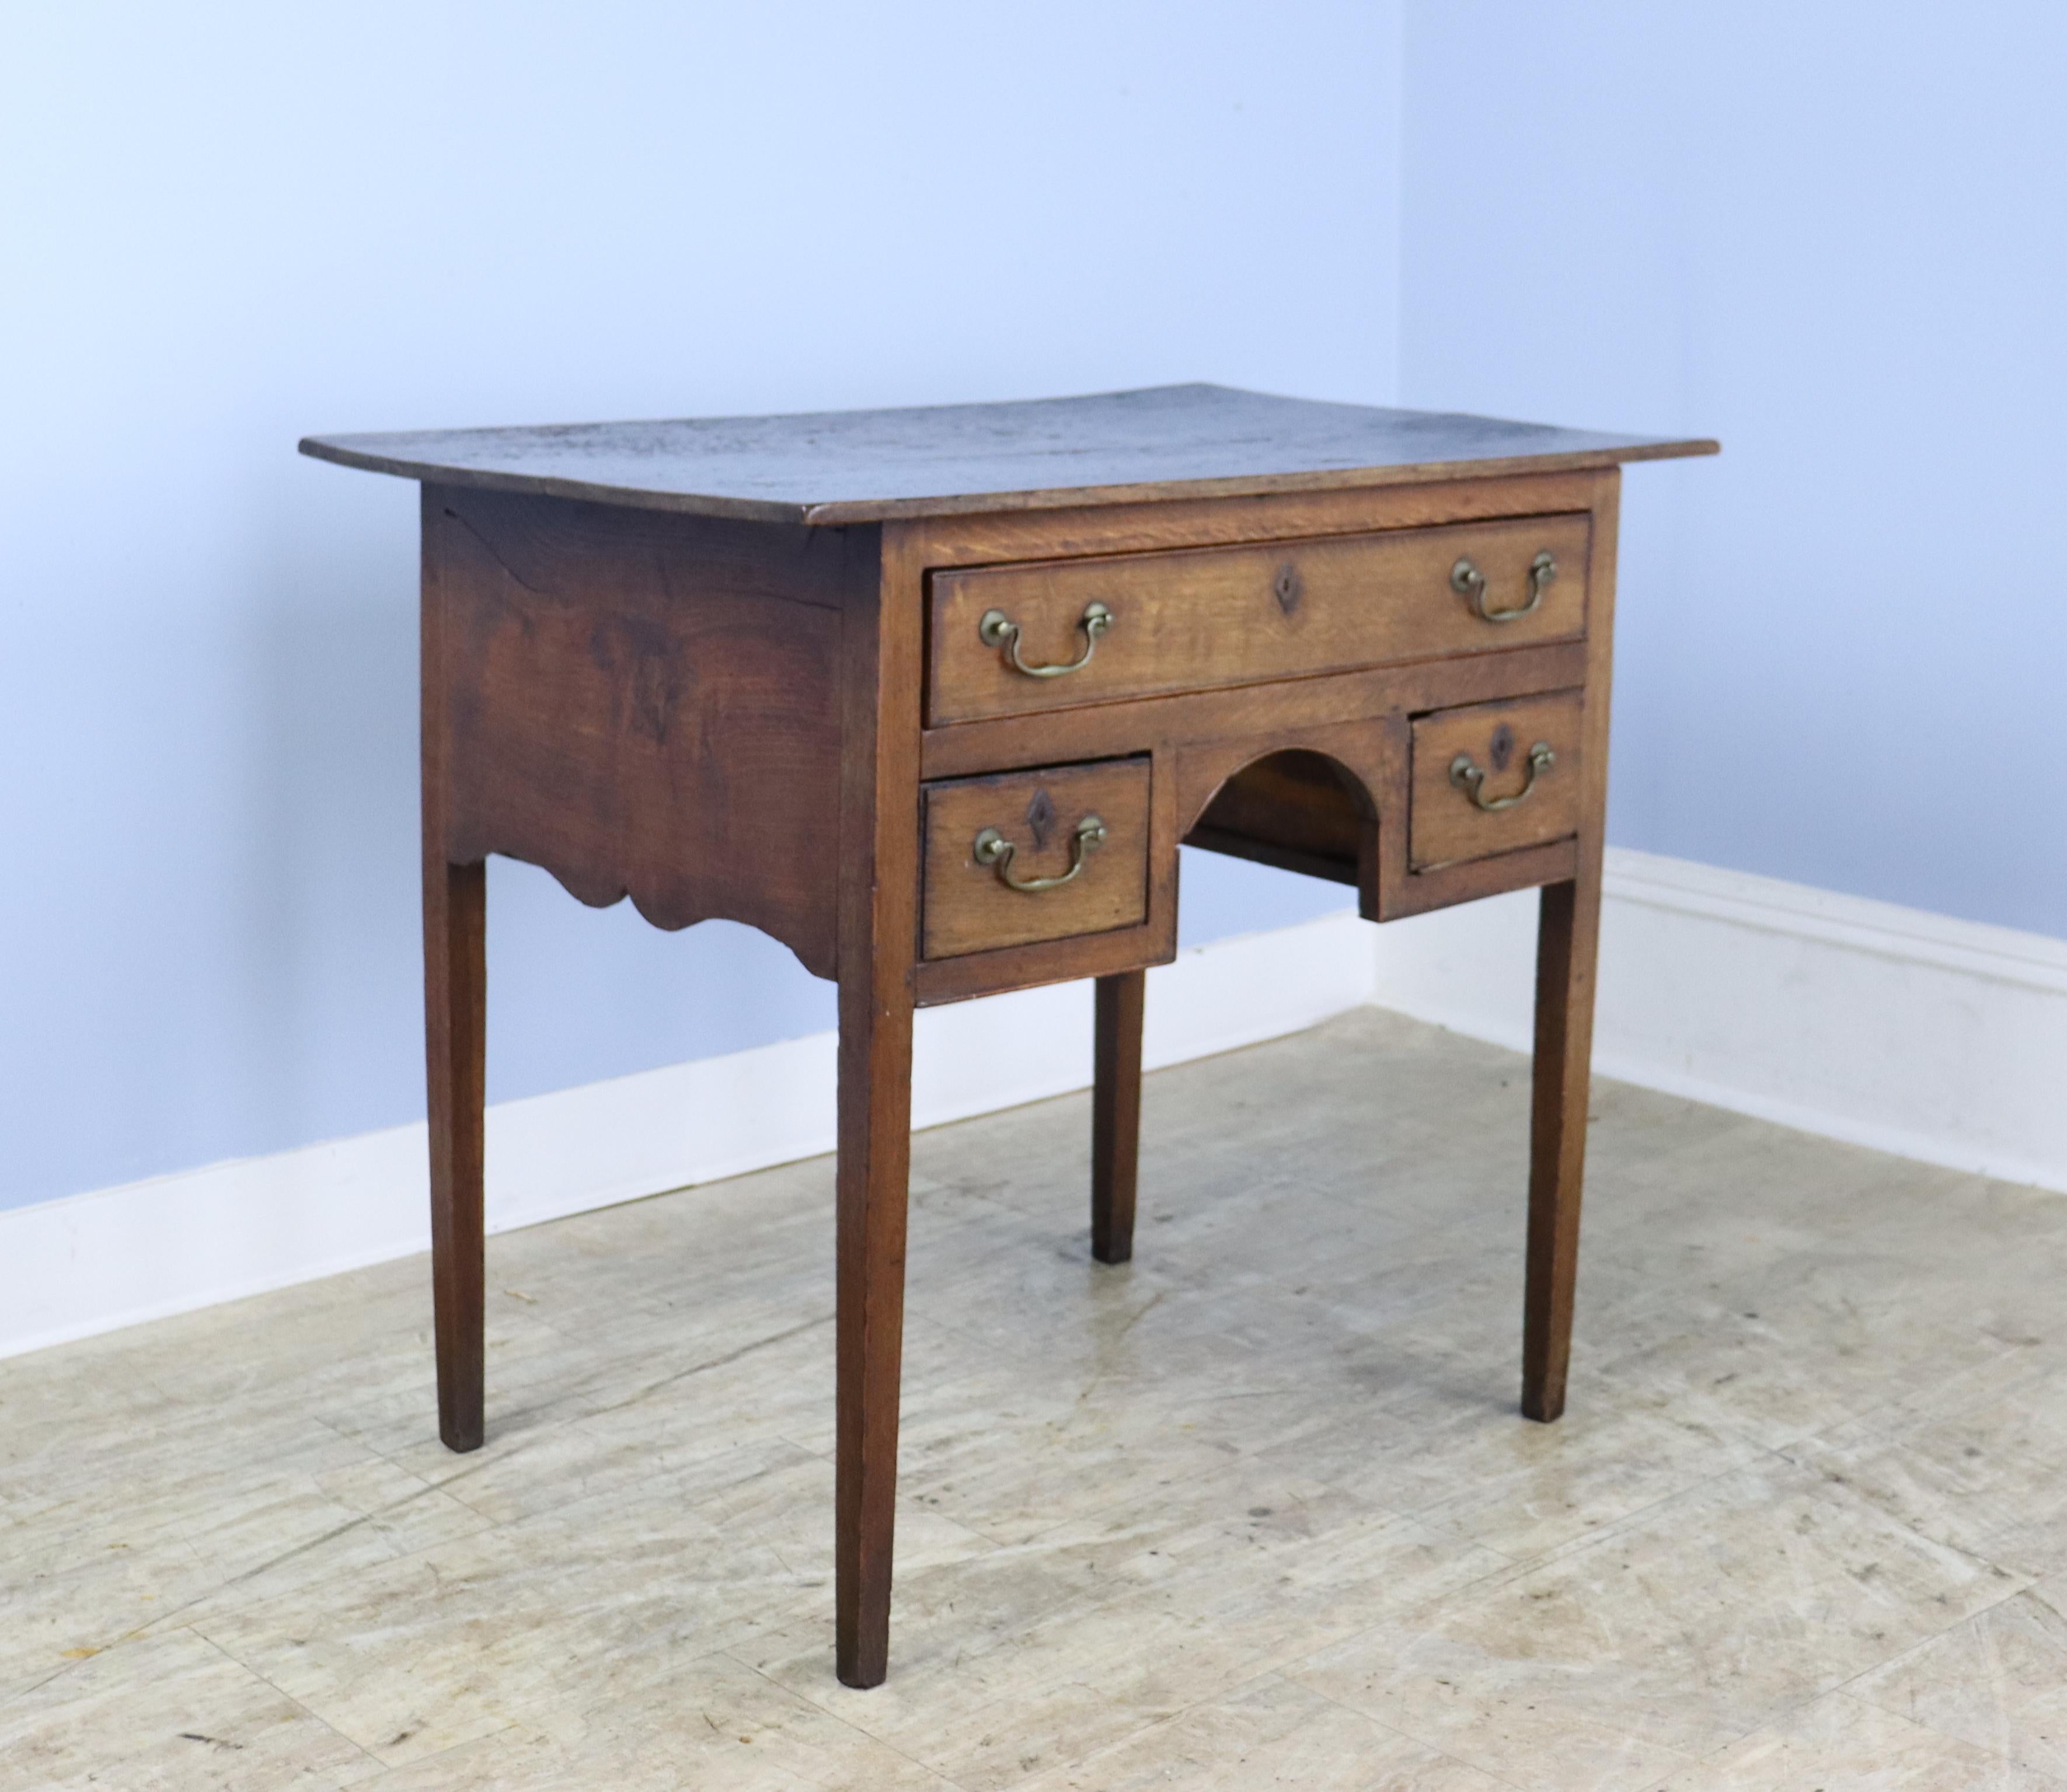 An early period oak lowboy with a glossy patinated natural grained top that we rarely see.  Good oak color and classic lowboy construction.  The three drawers open and close easily, though a bit of the cockbeading has come off around one of the